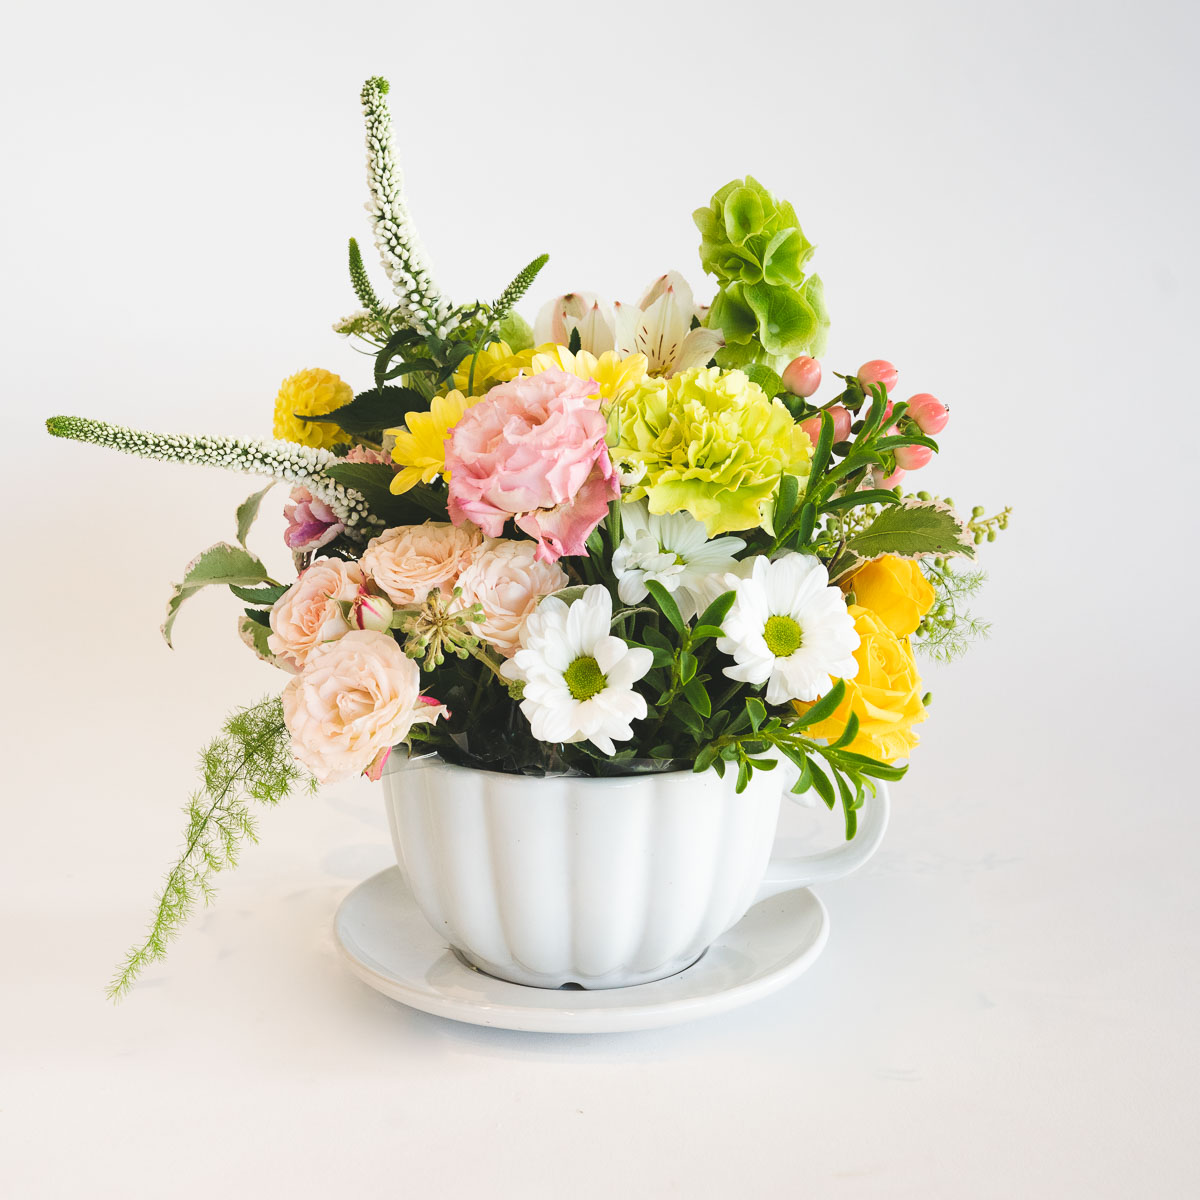 Flower arrangement in lemon and lime seasonal flowers to include some roses, chrysanthemums and sims.